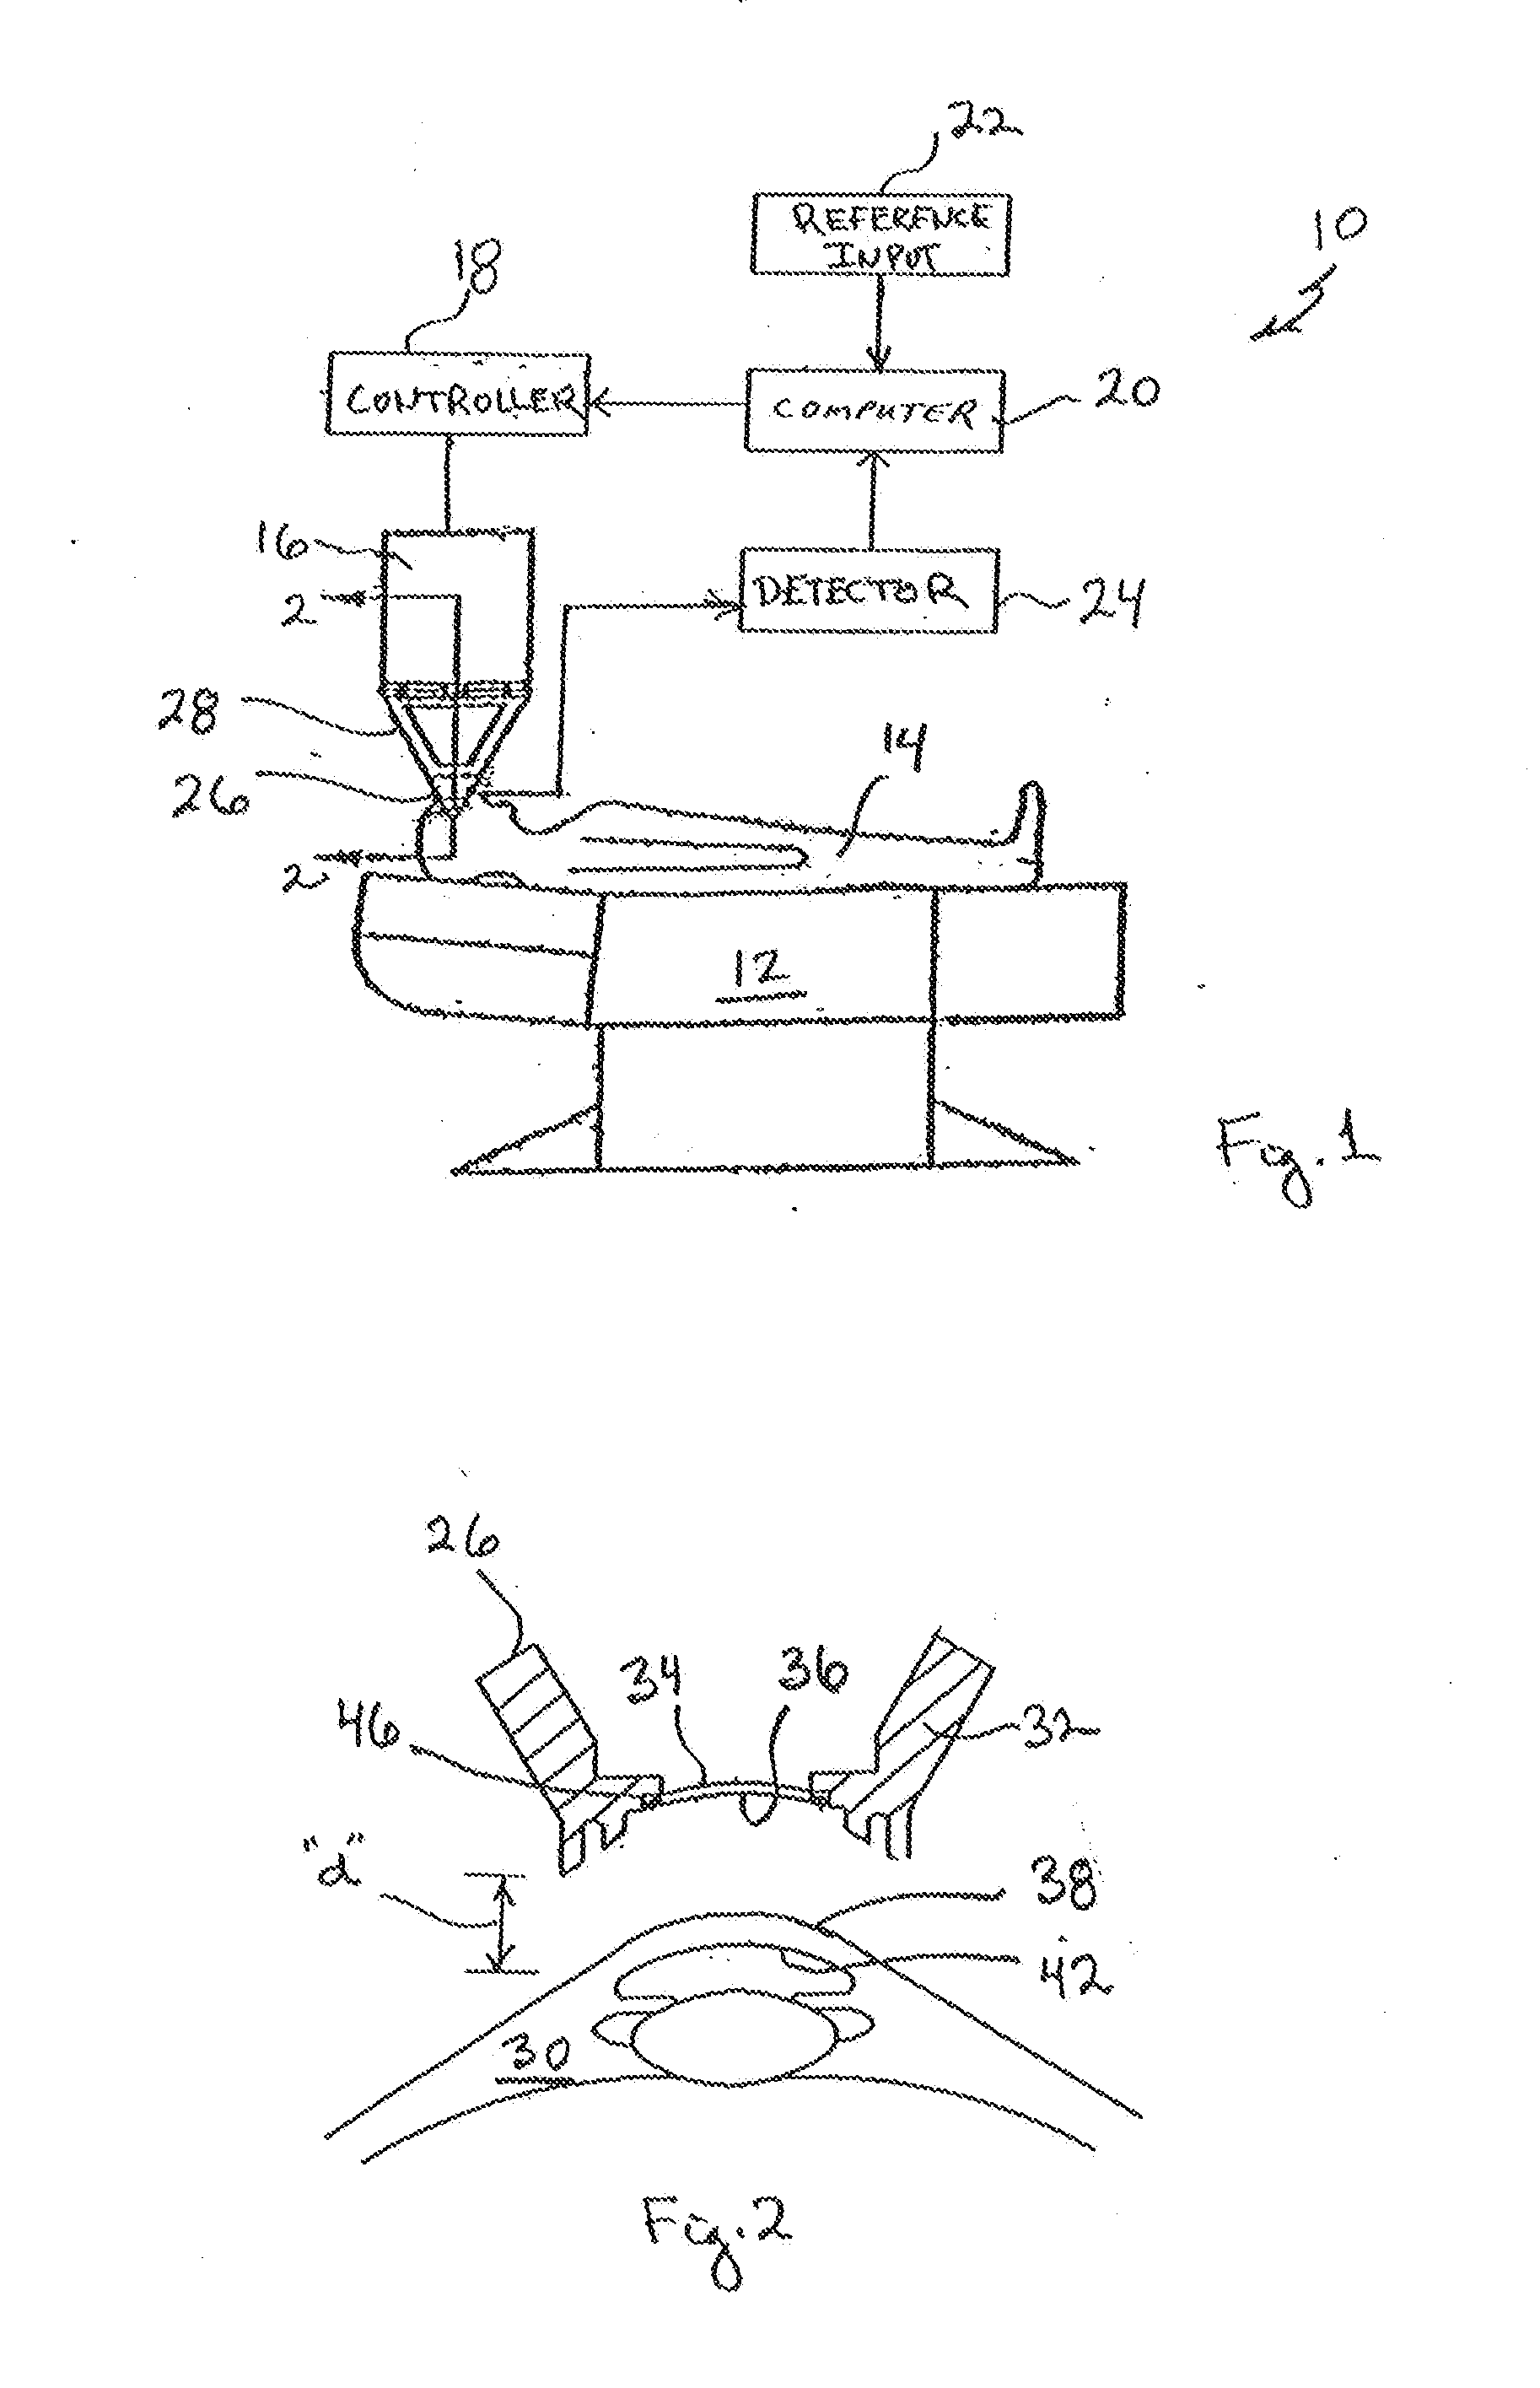 Apparatus and Method for Control of Refractive Index Changes in a Material